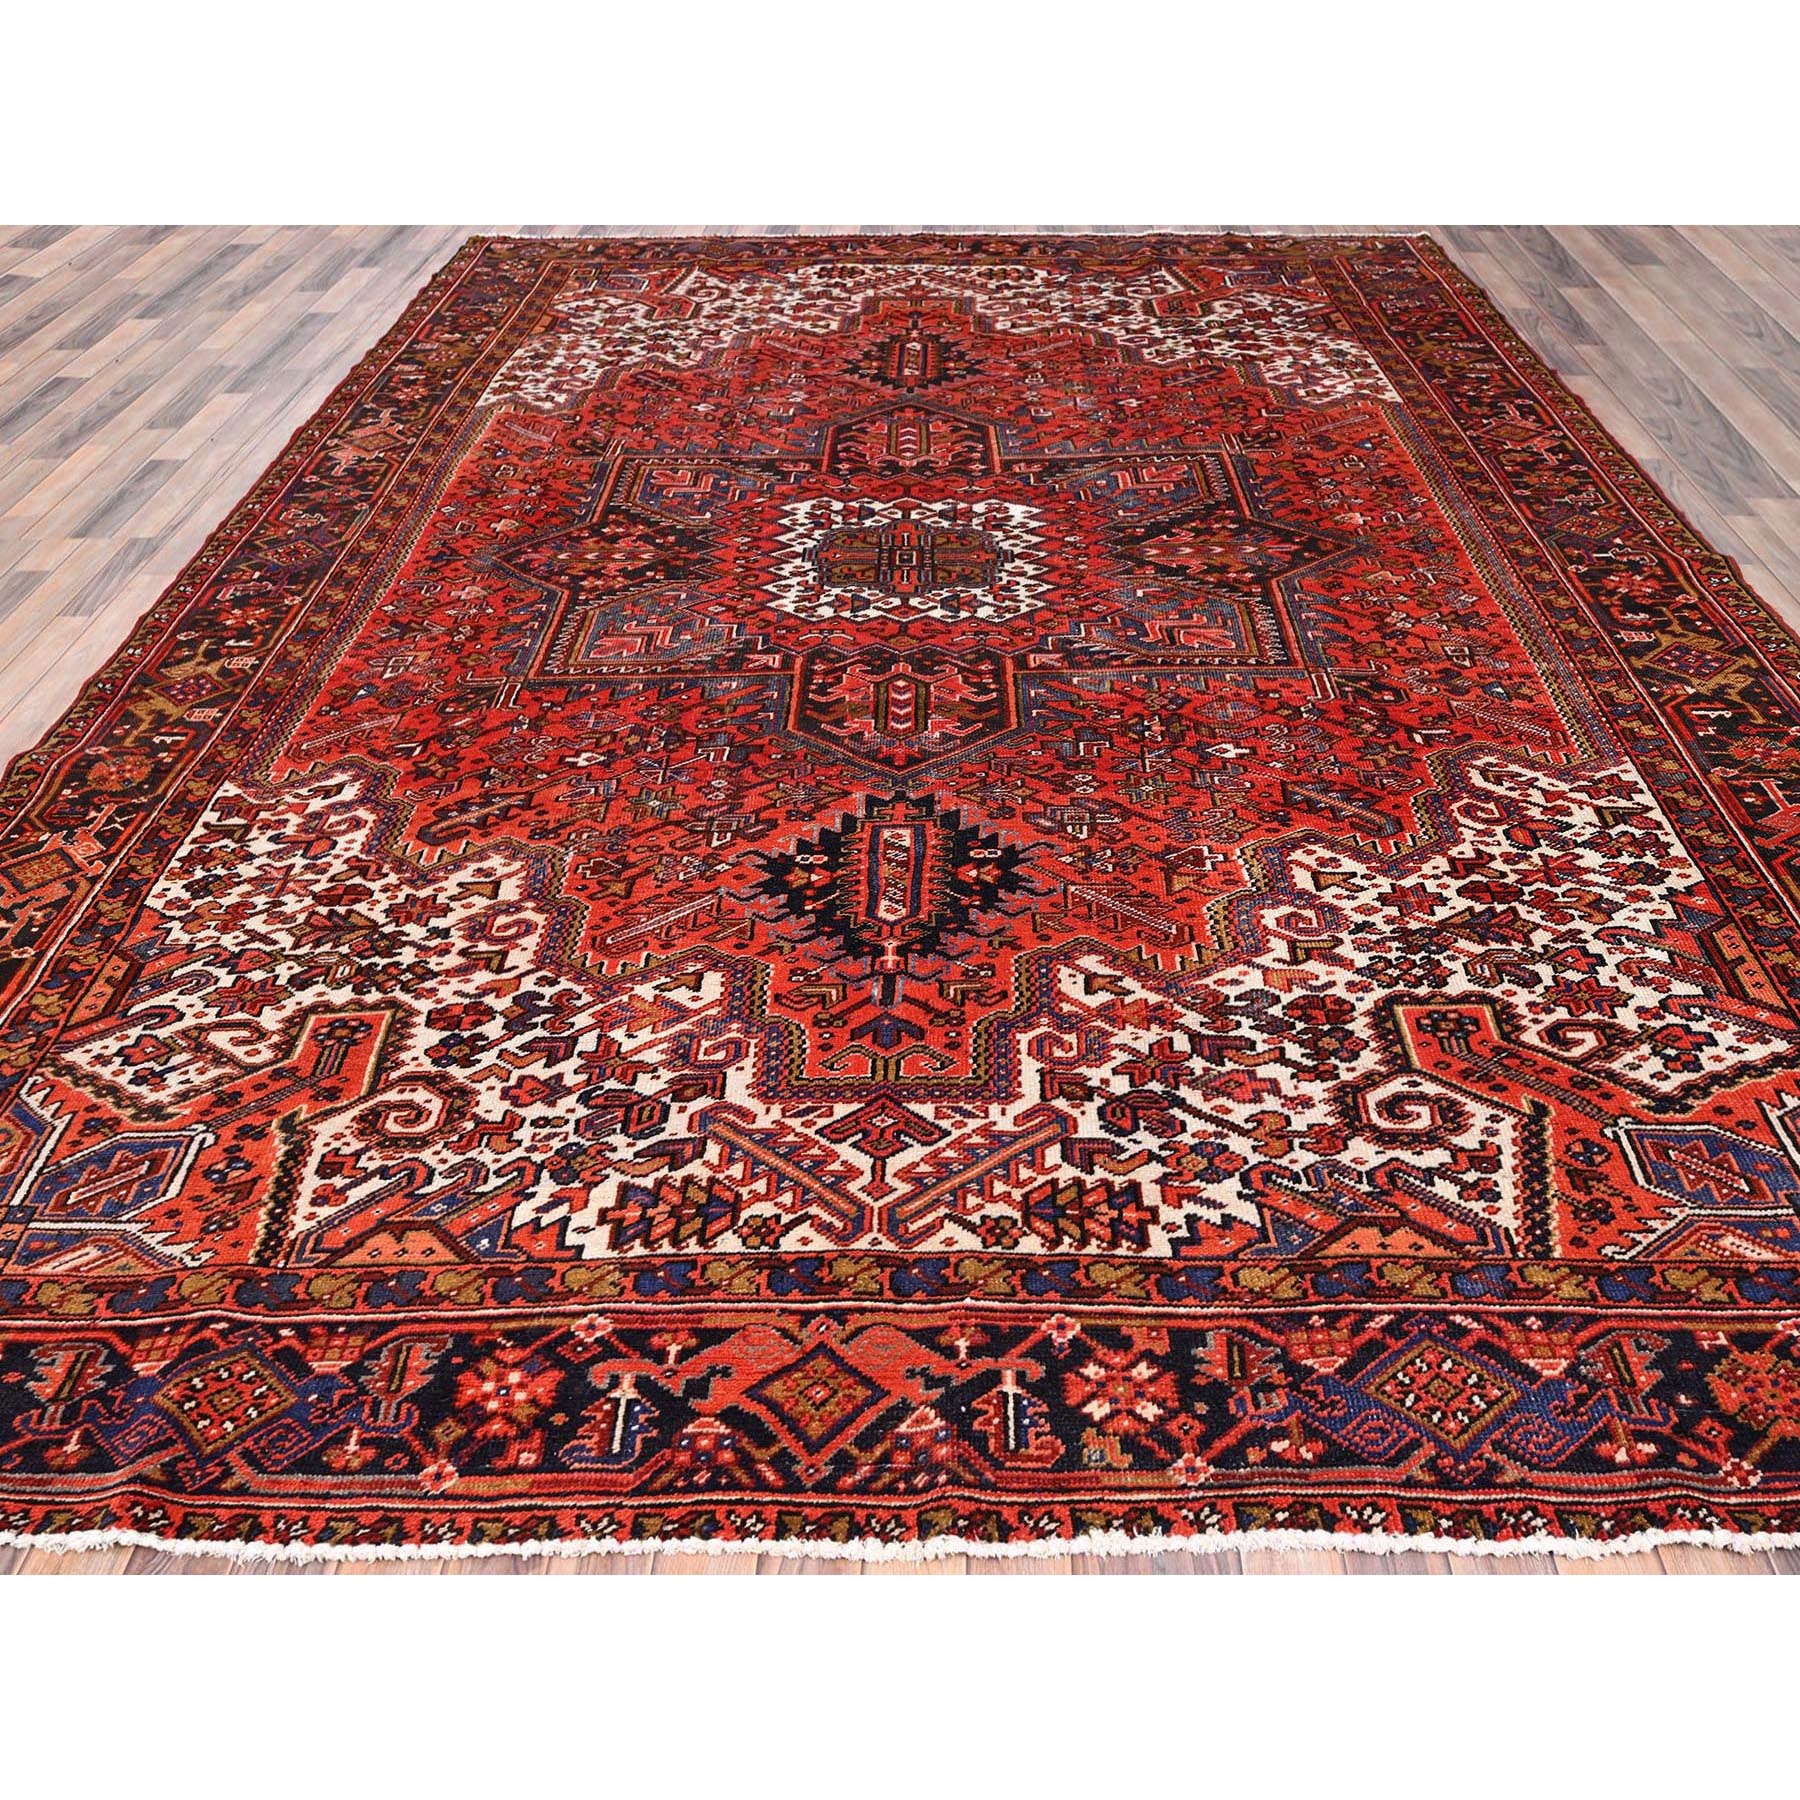 10'x13'2" Fire Brick Red, Pure Wool, Hand Woven, Semi Antique Persian Heriz with Village Motif, Good Condition, Distressed Look, Oriental Rug 